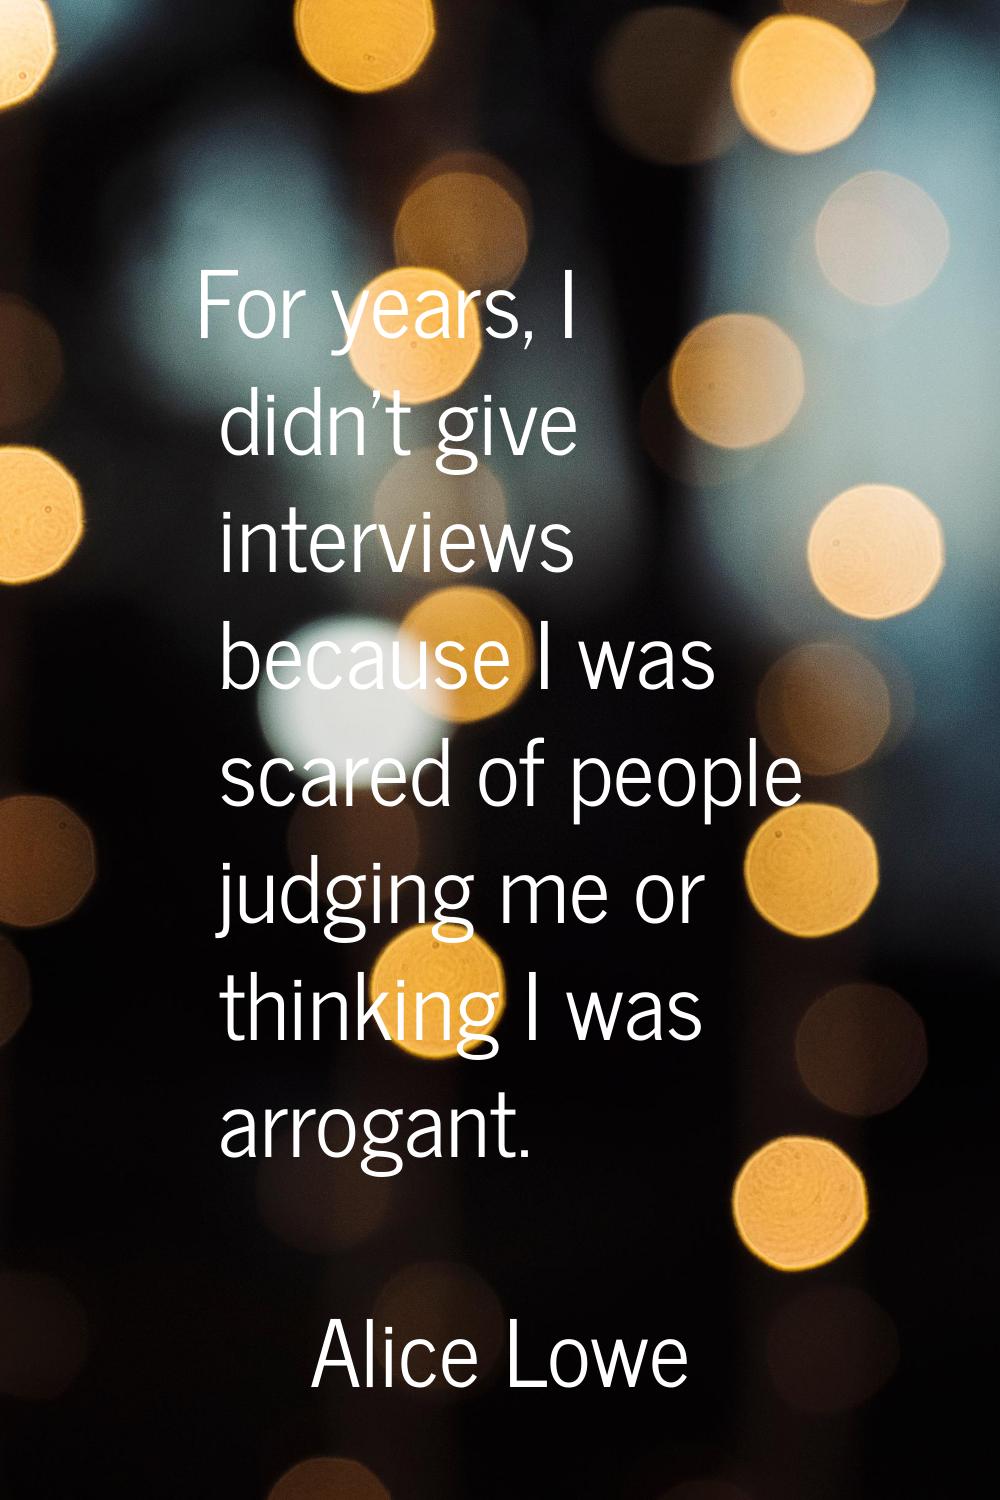 For years, I didn't give interviews because I was scared of people judging me or thinking I was arr